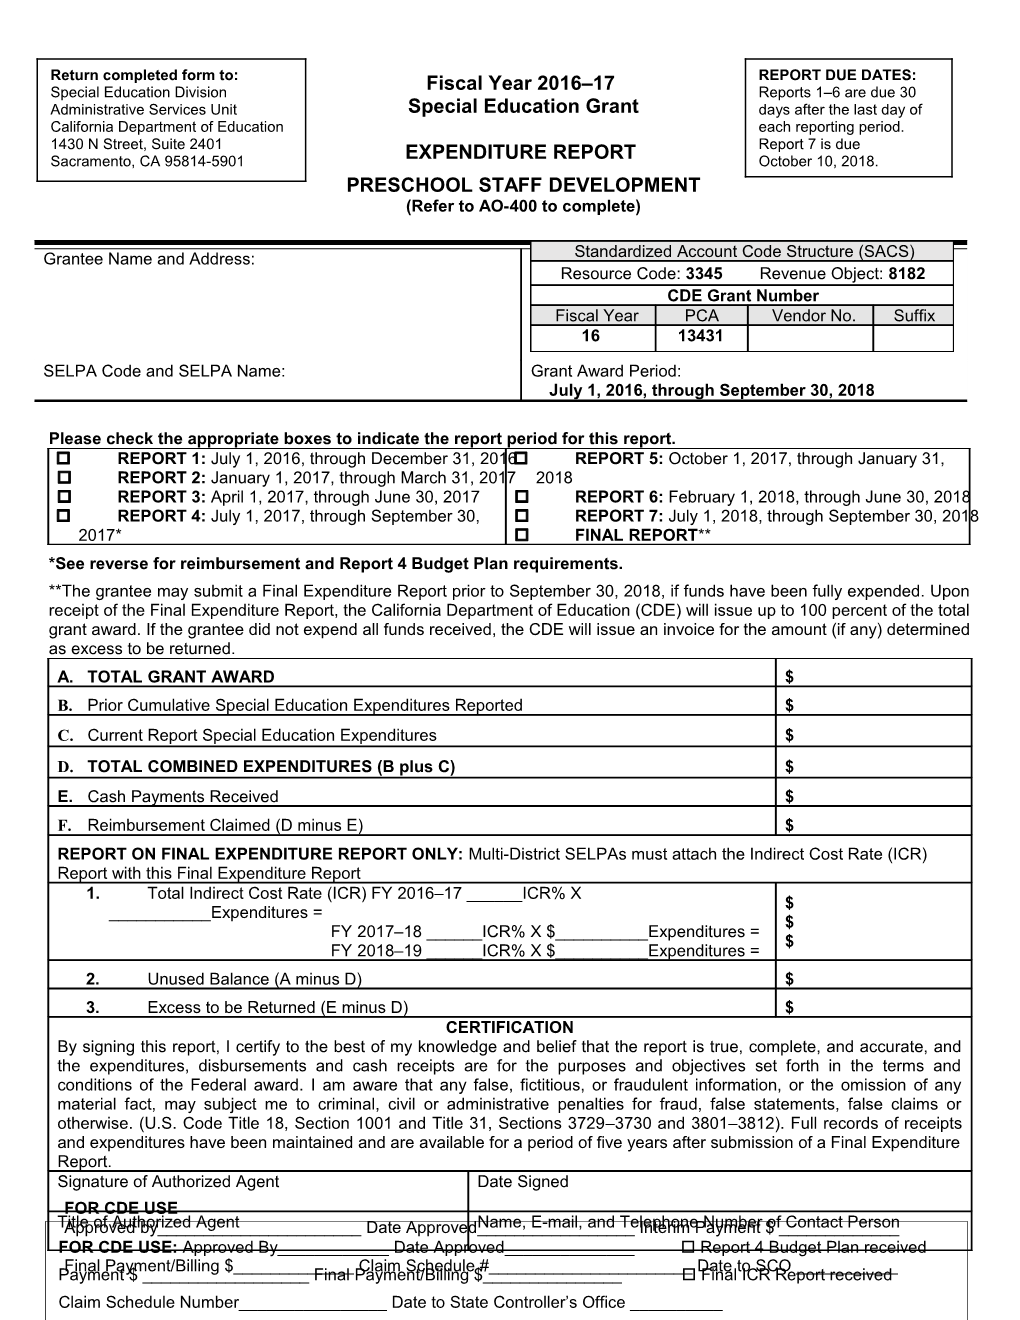 Form-16: Expenditure Report PCA 13431 PSD - Administration & Support (CA Dept of Education)